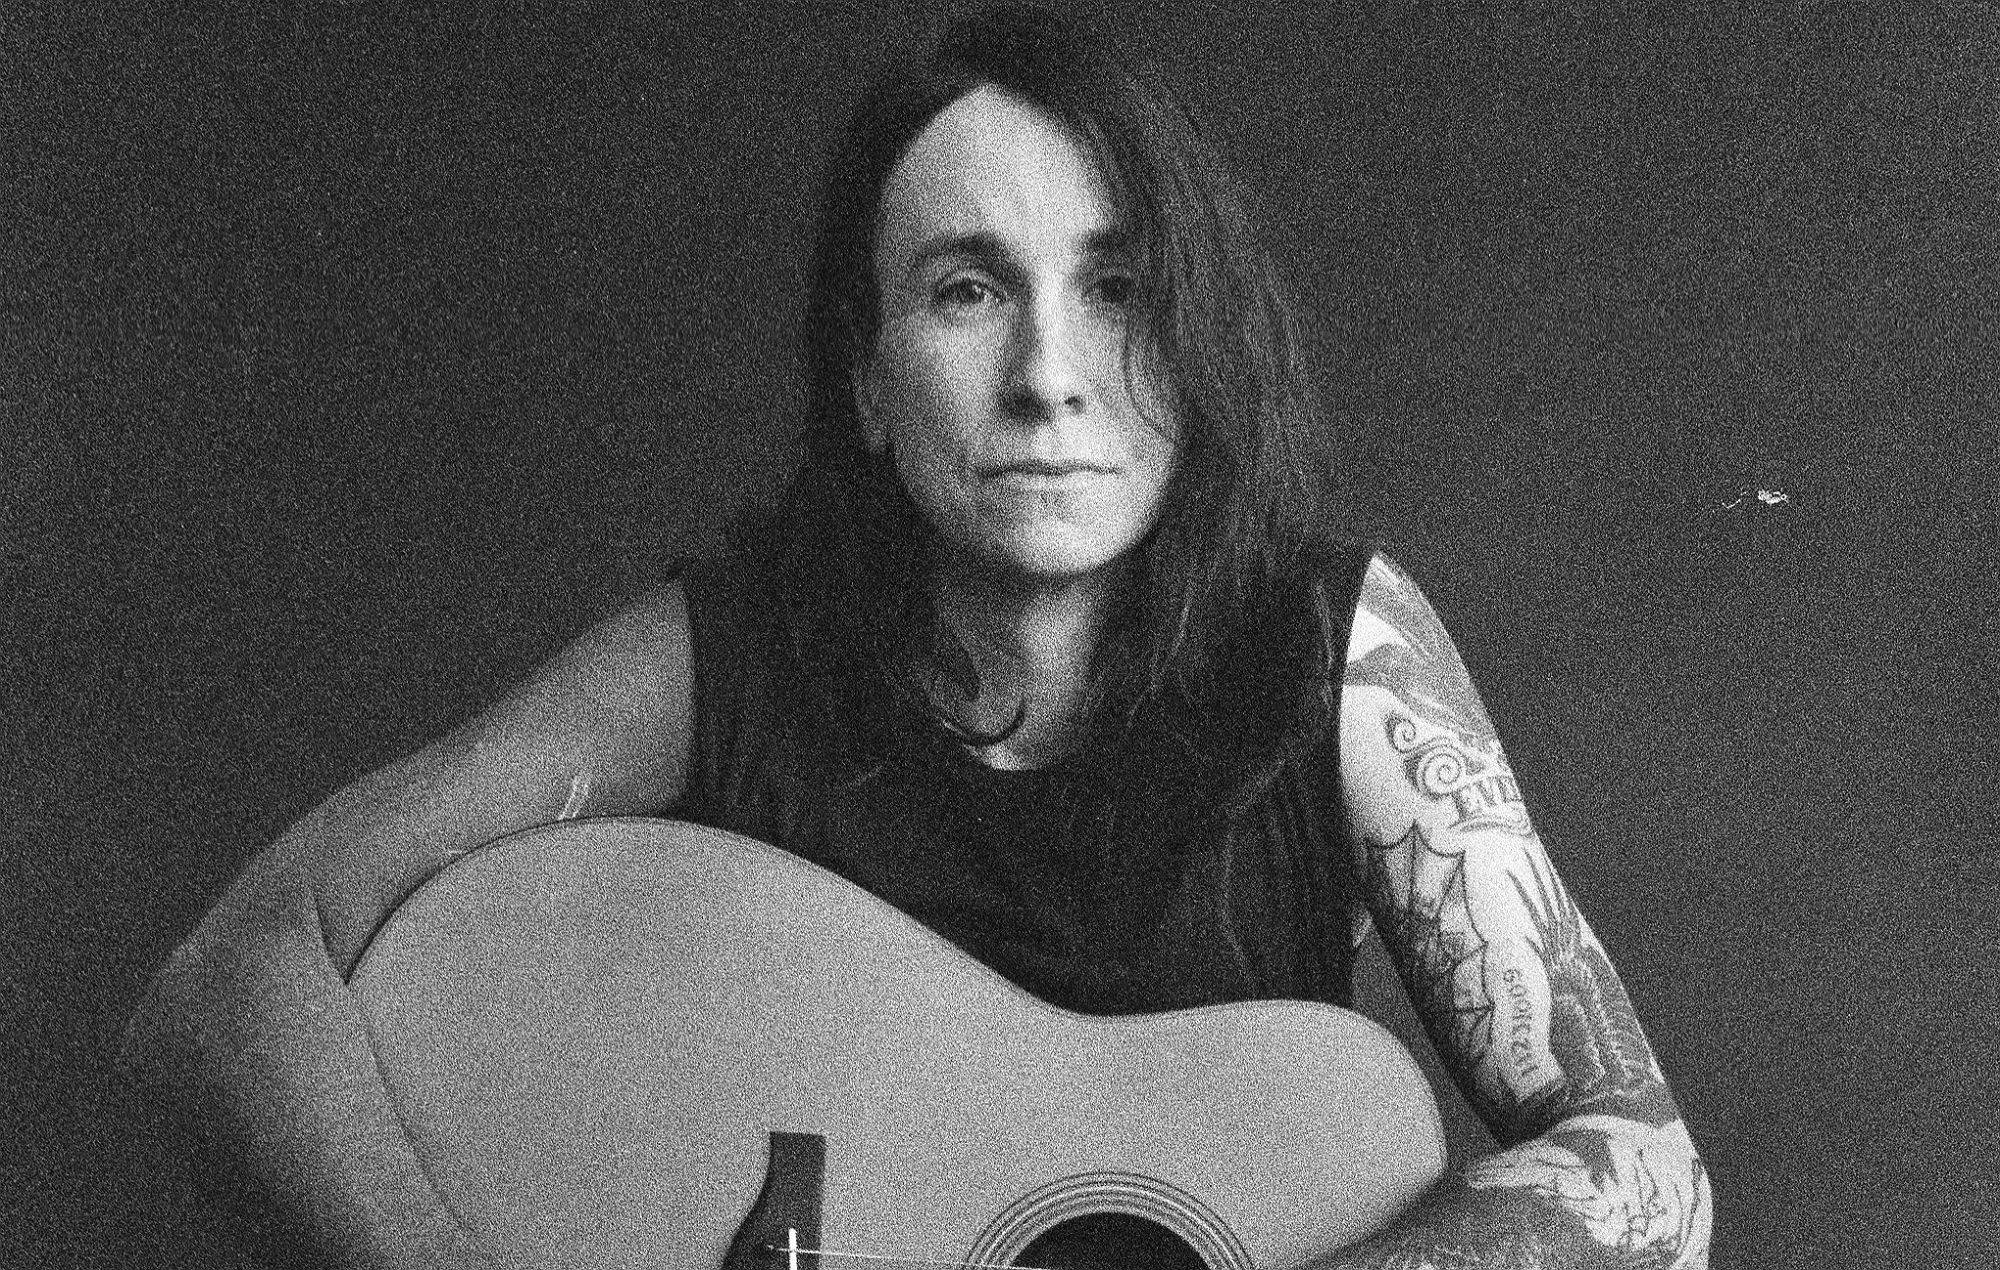 Laura Jane Grace: “JK Rowling has no grounds to speak on the transgender experience because she knows nothing about it”